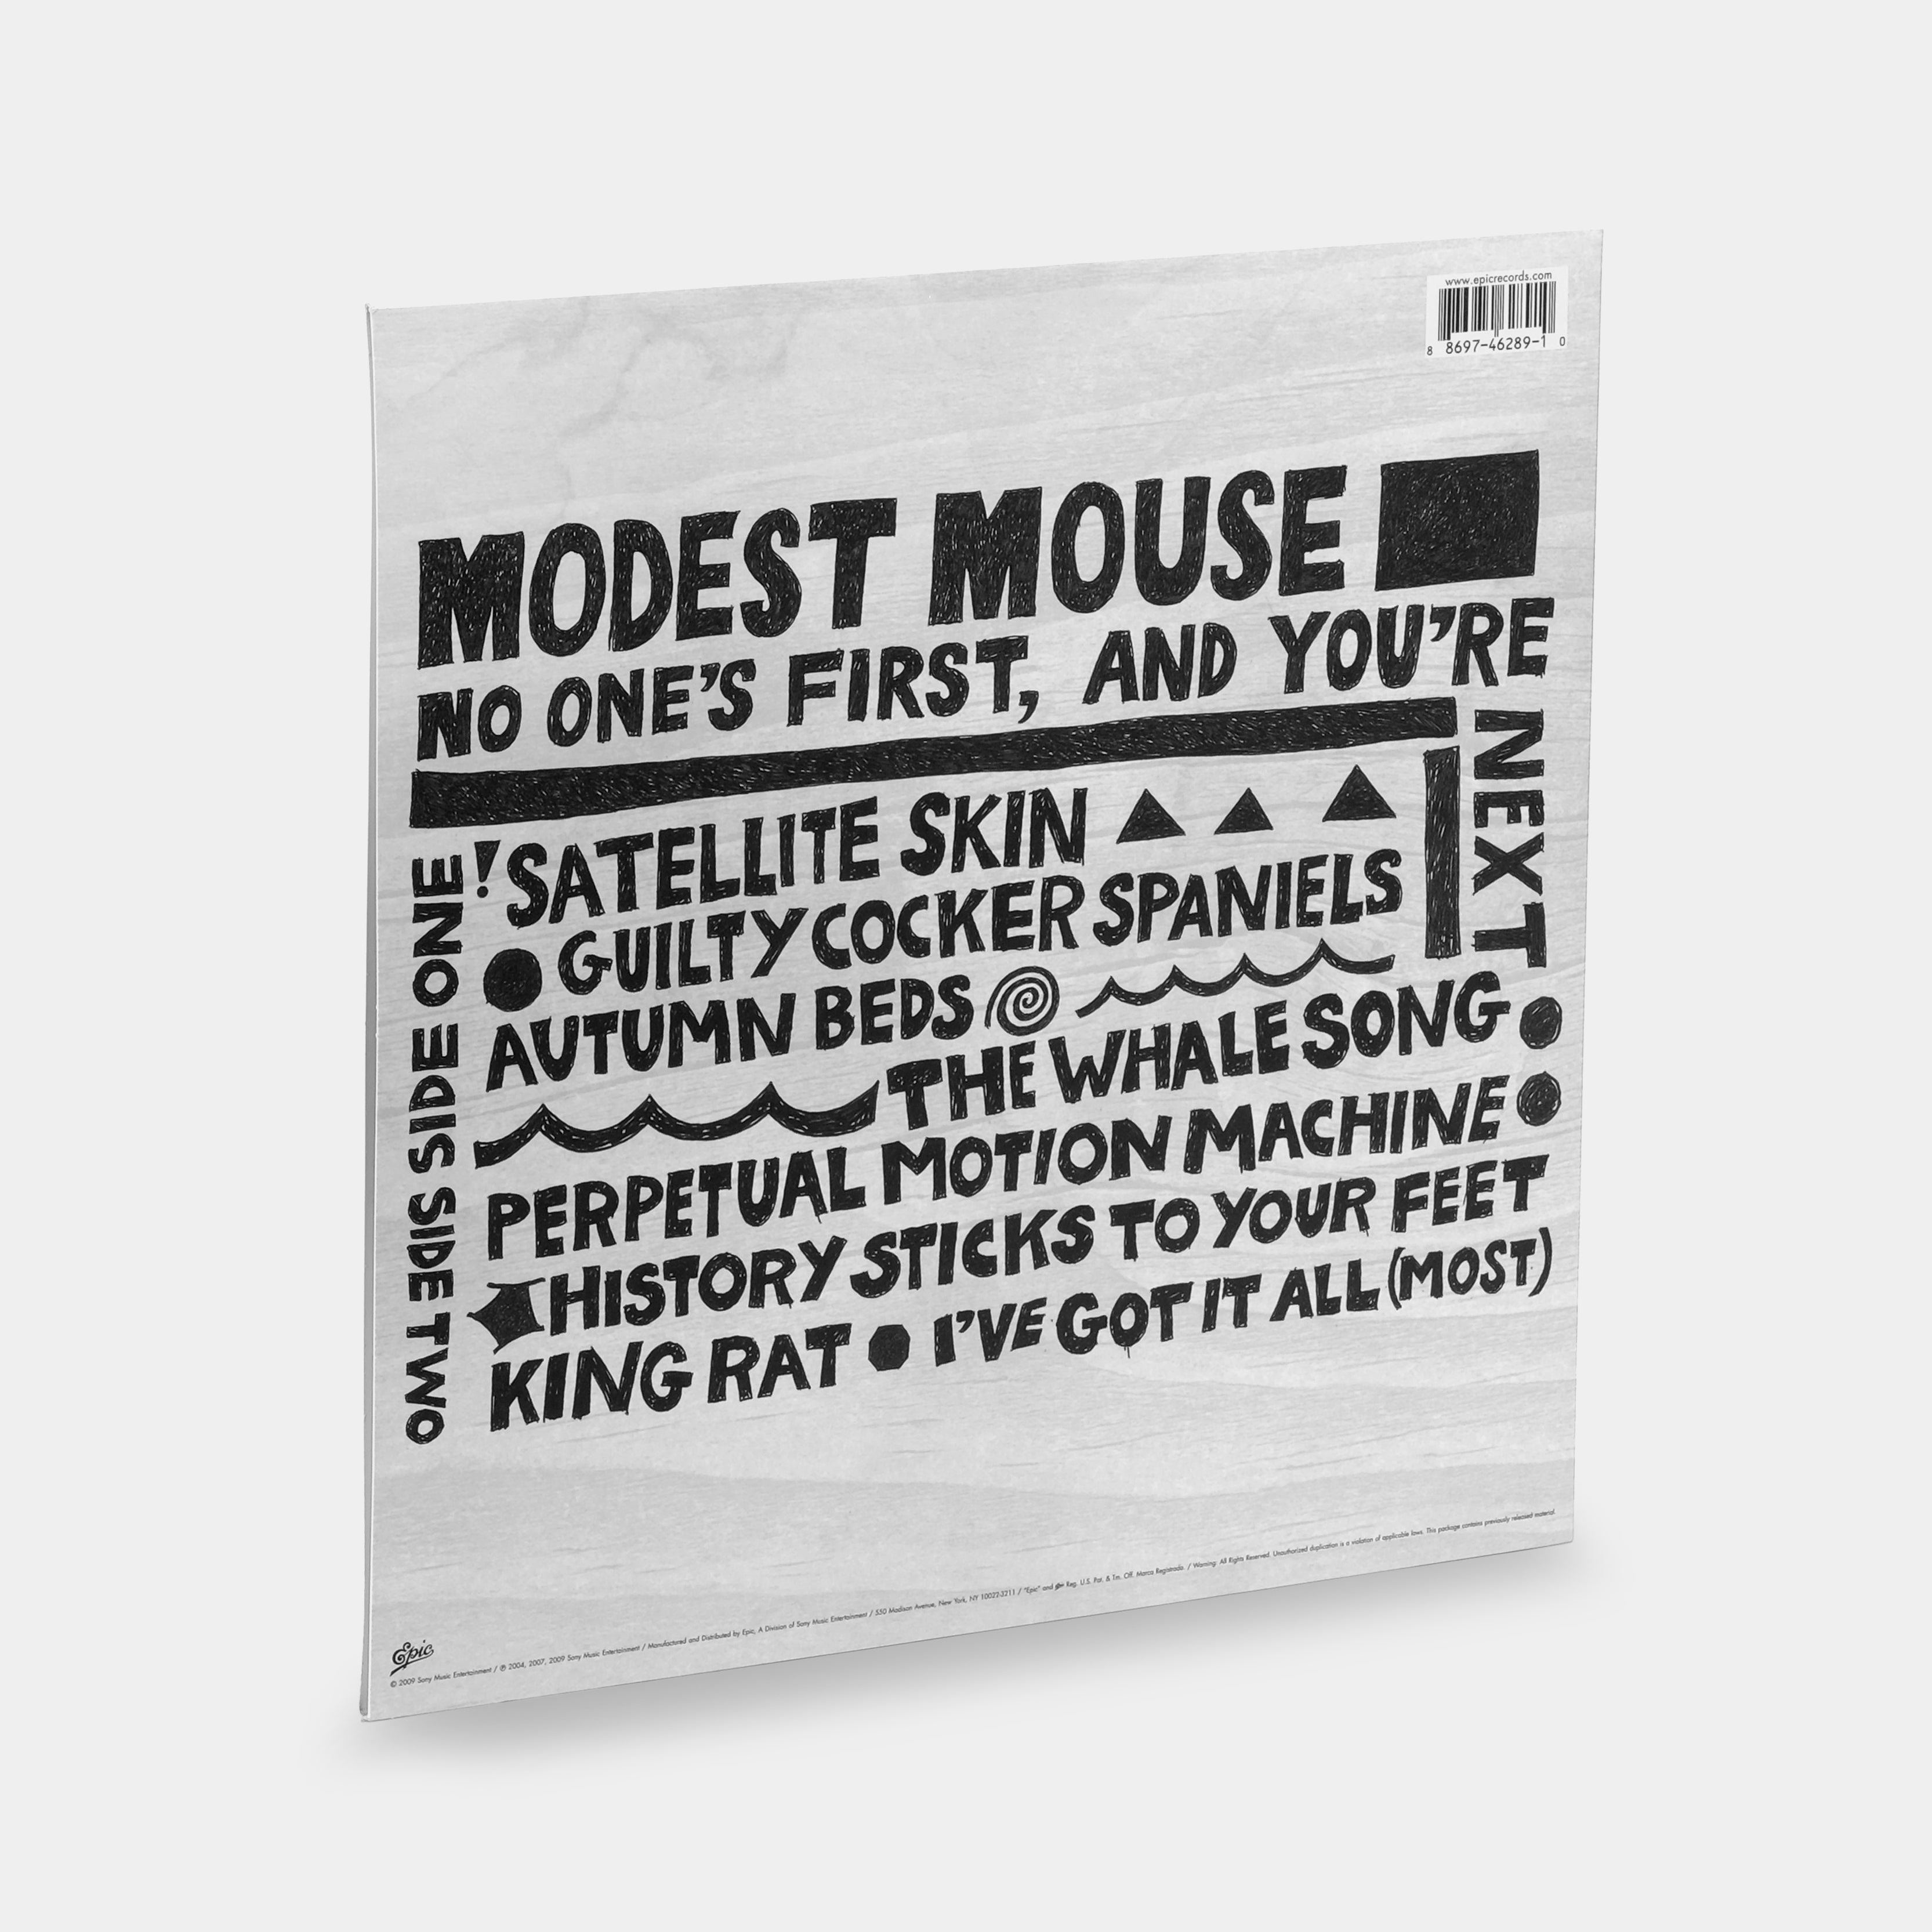 Modest Mouse - No One's First, And You're Next EP Vinyl Record